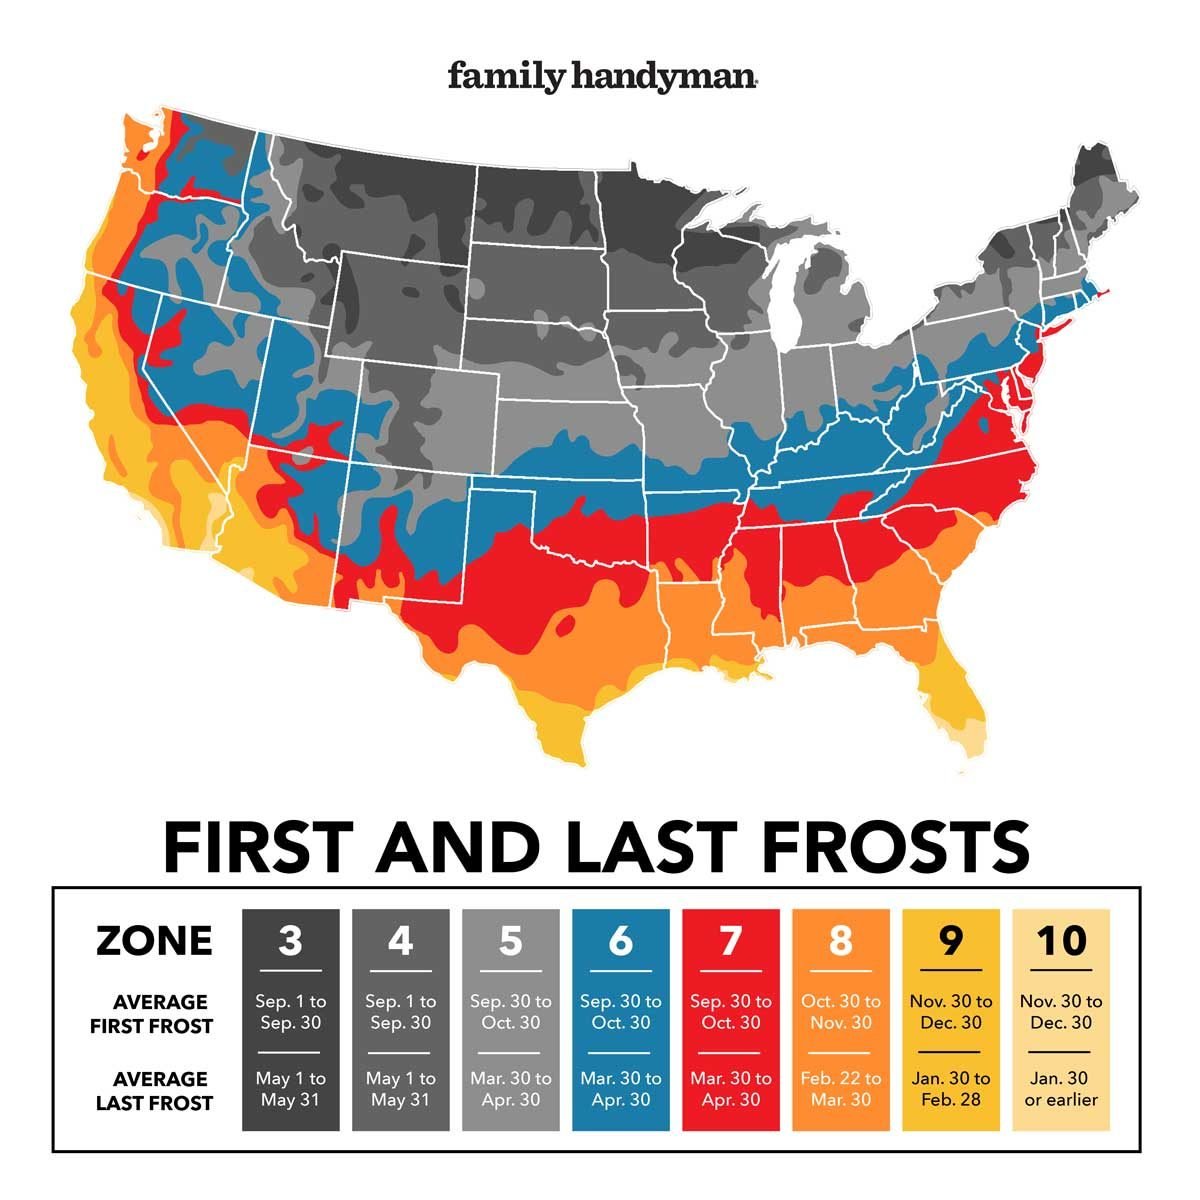 What Is the First Frost Date Where You Live?